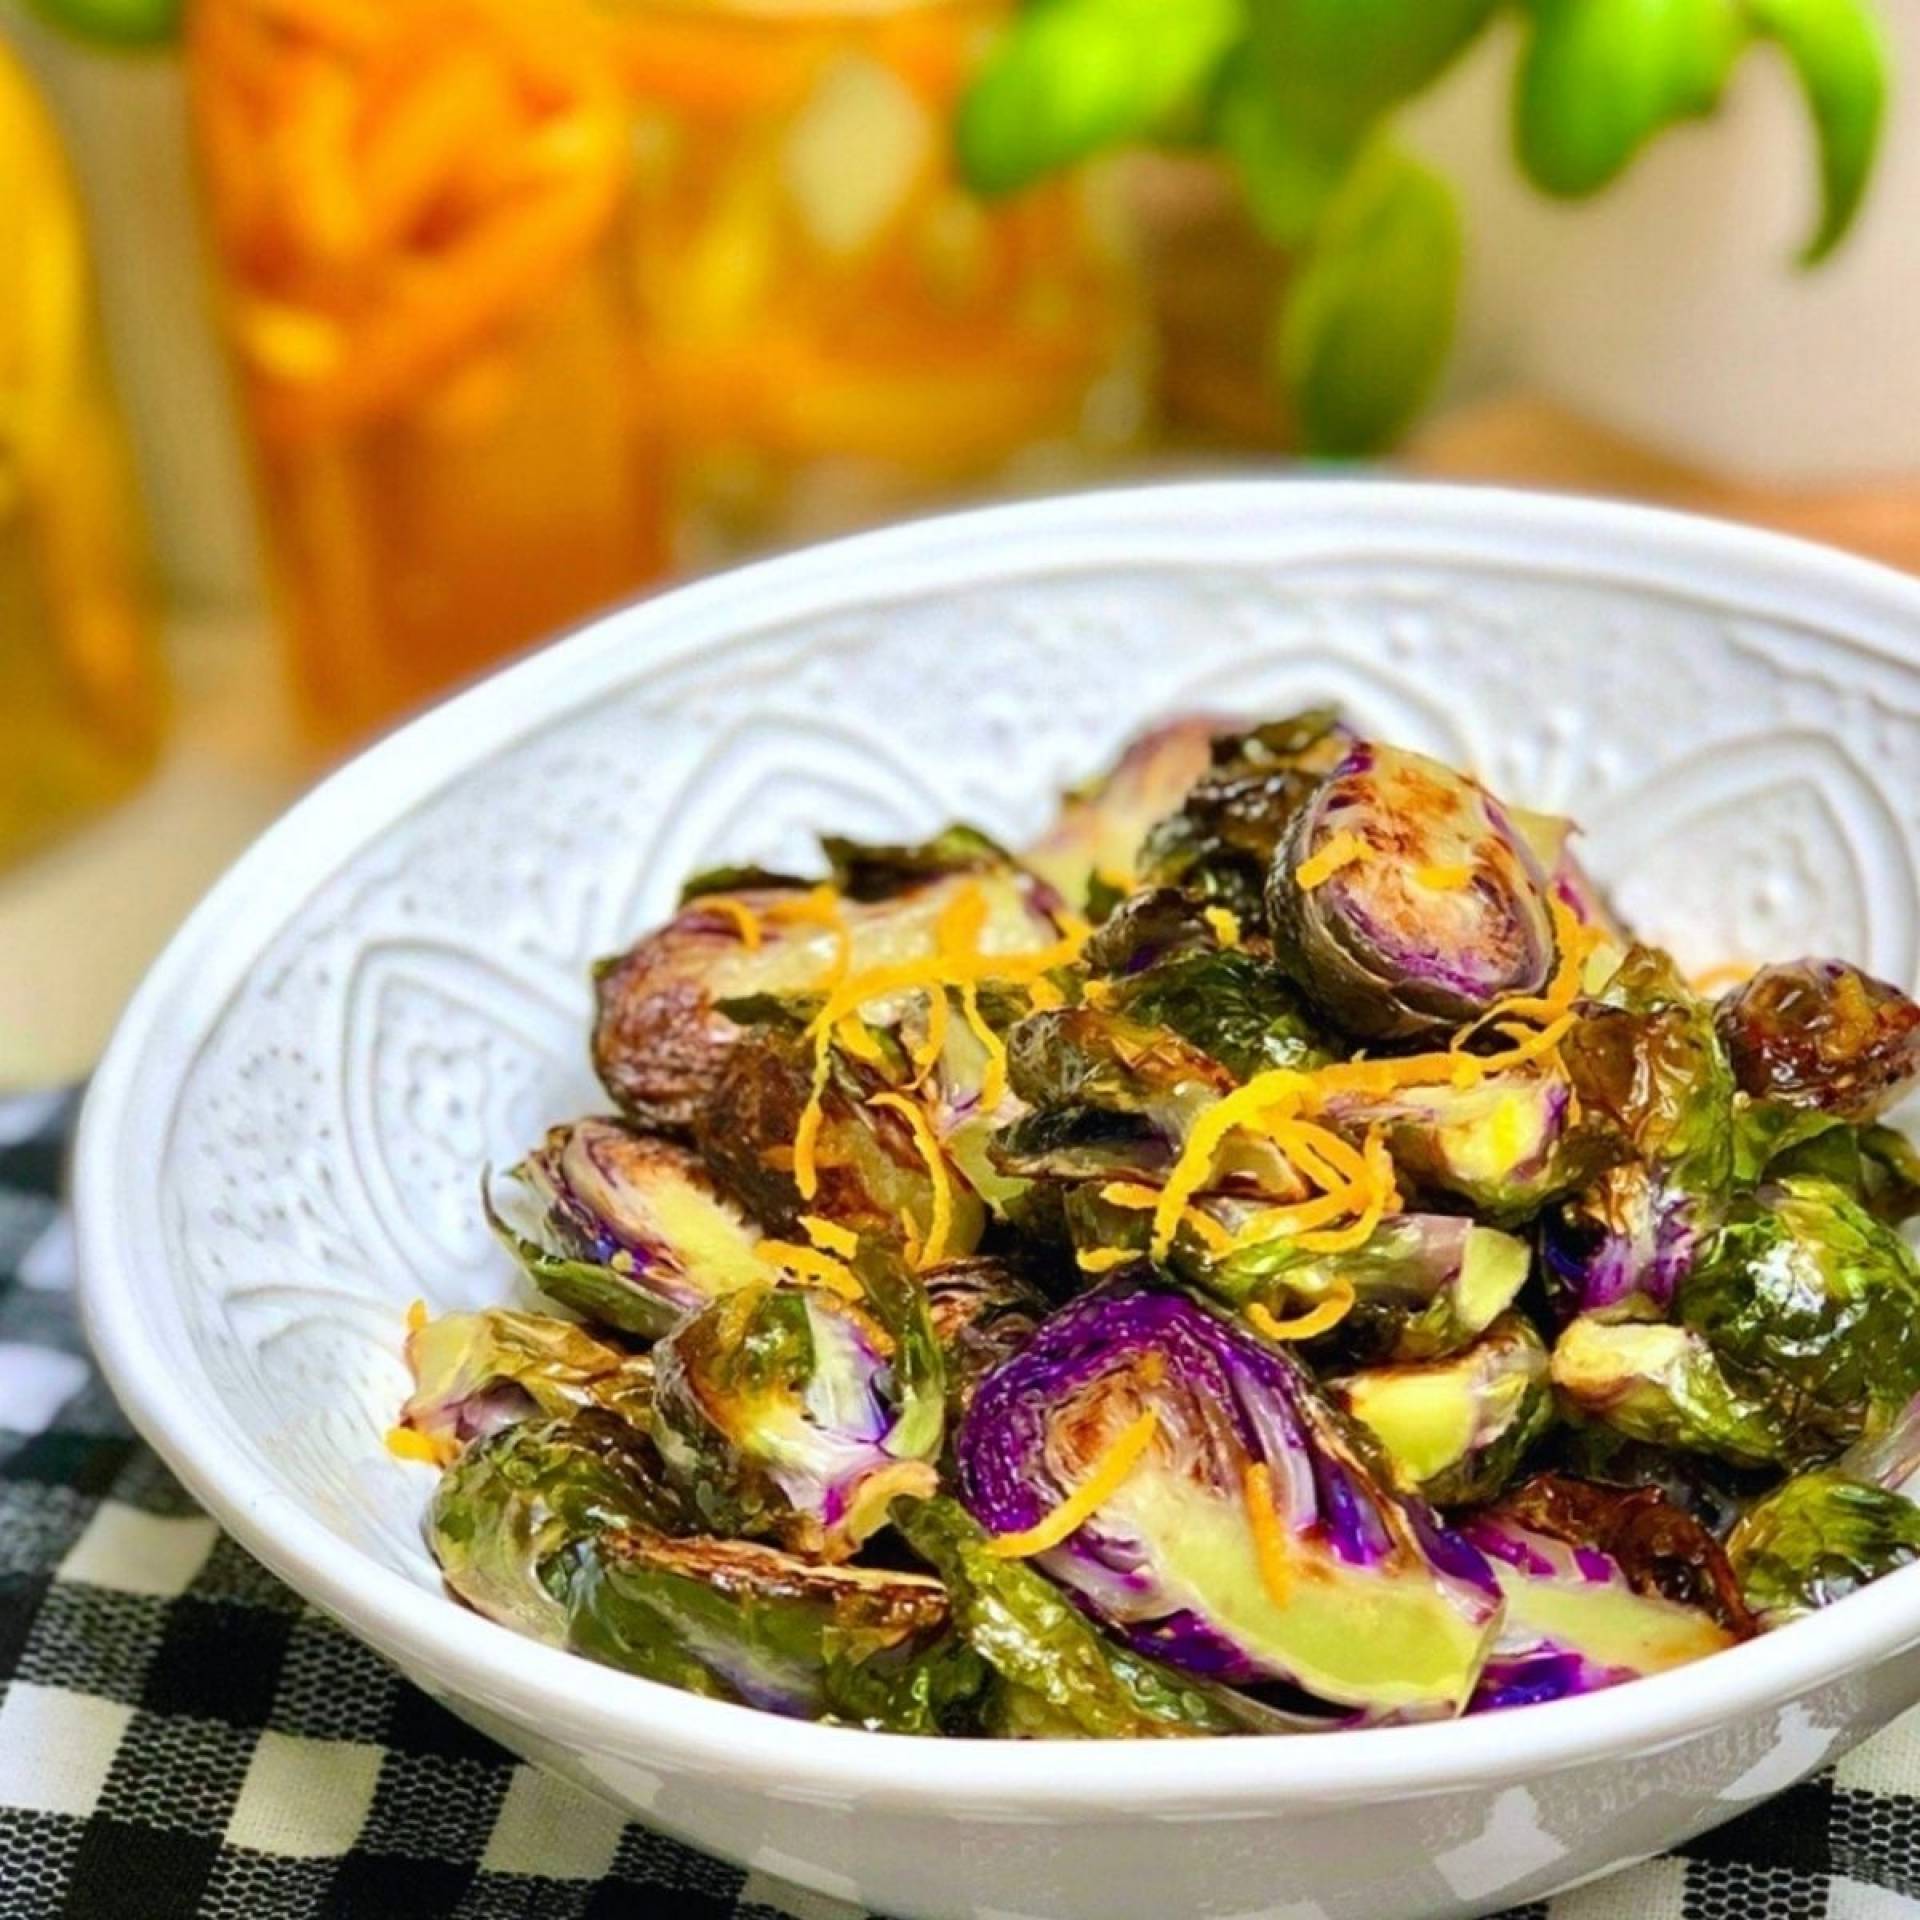 Roast Brussels Sprouts With Orange Zest and Honey